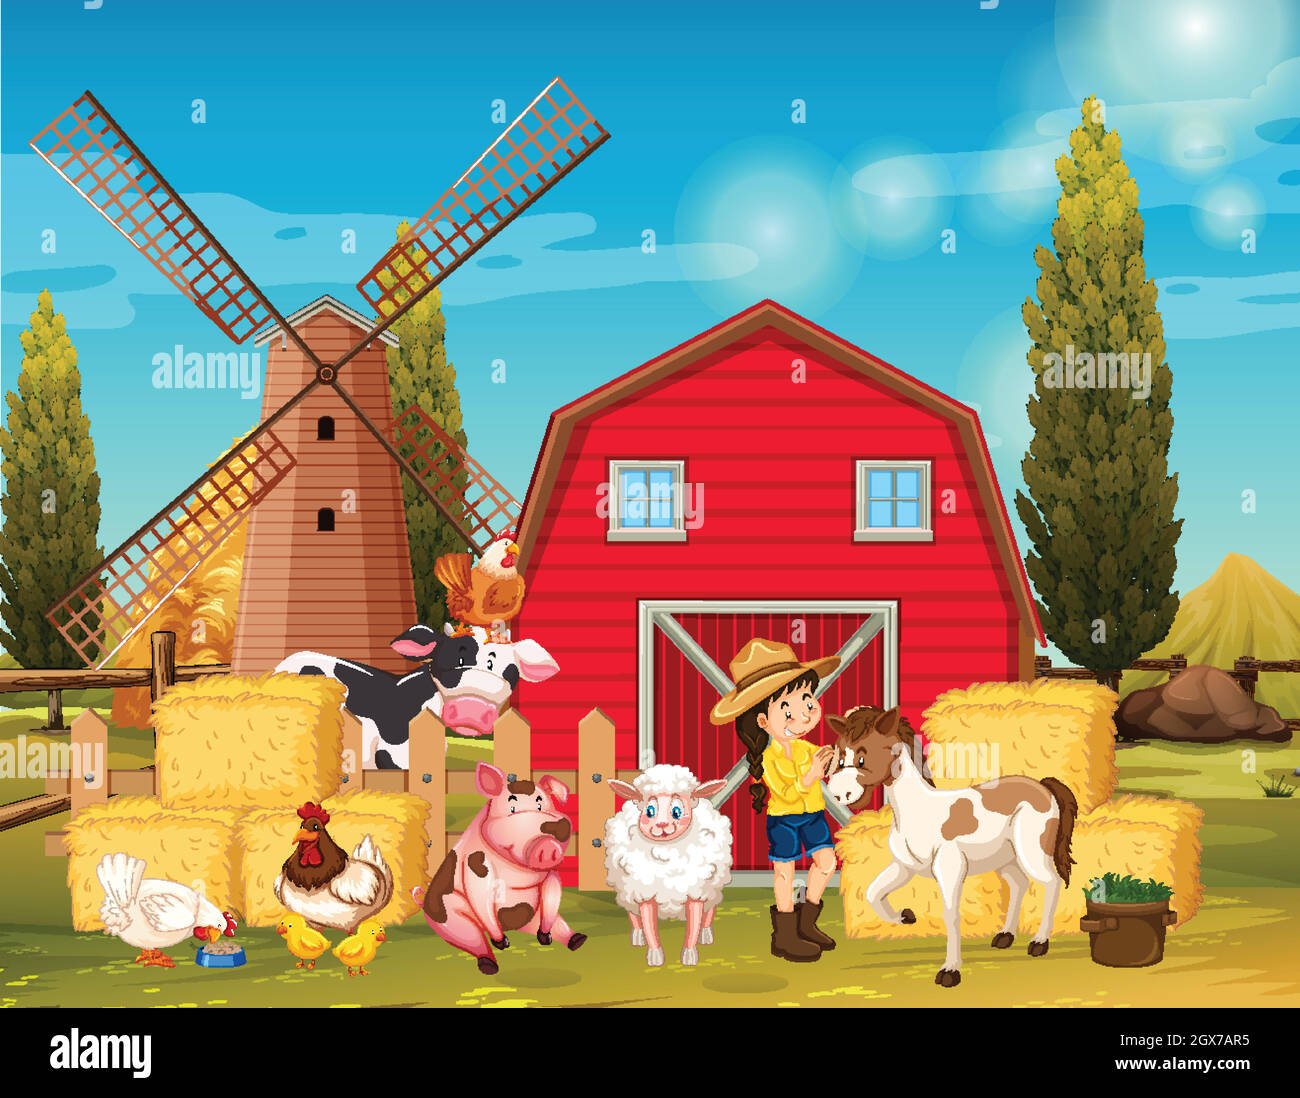 Farm scene with windmill and animals on the farm Stock Vector